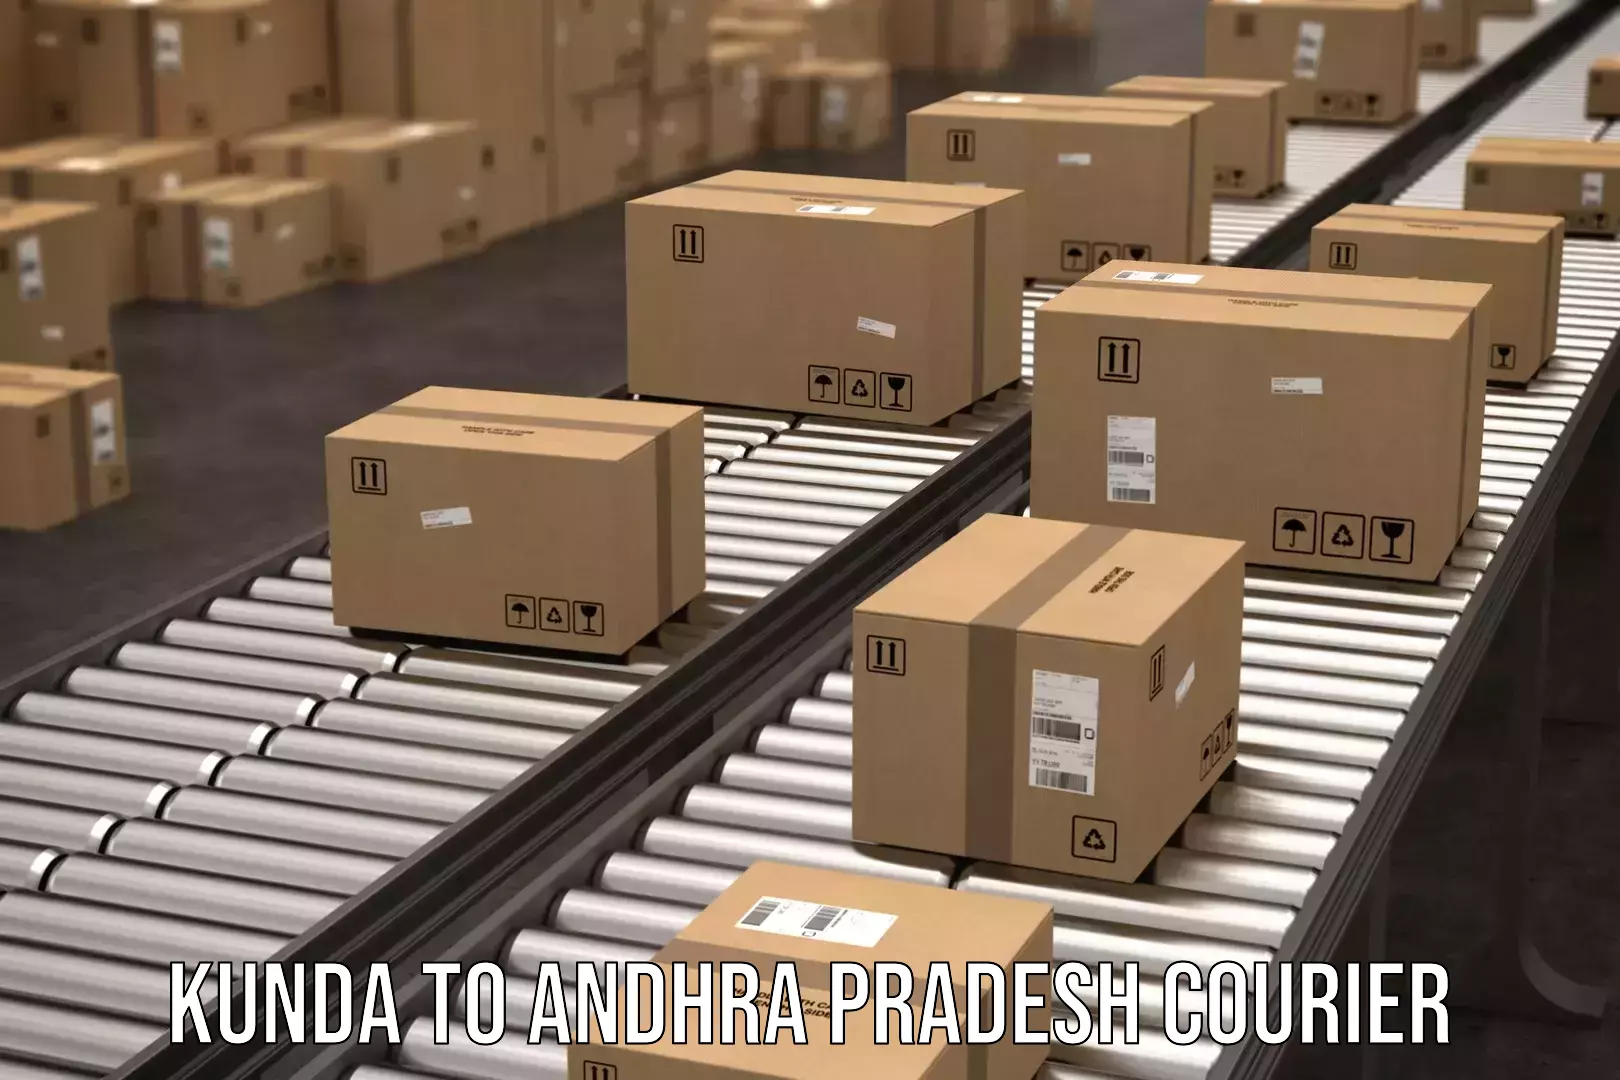 State-of-the-art courier technology Kunda to Andhra Pradesh